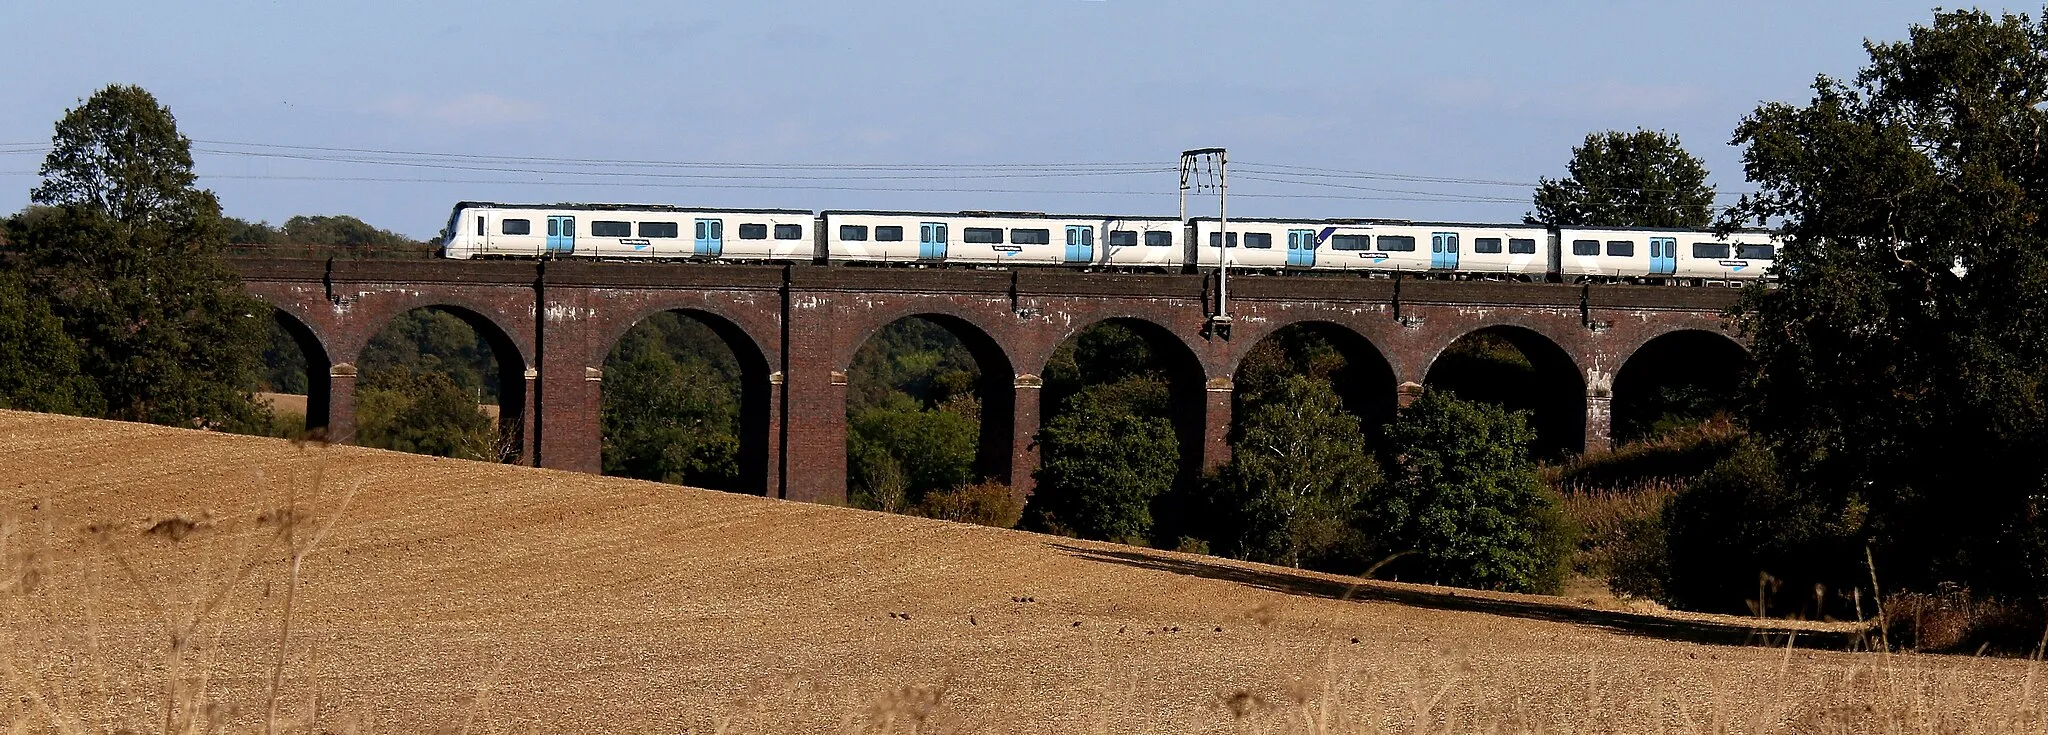 Photo showing: The viaduct spans a shallow valley just south of Cuffley station.